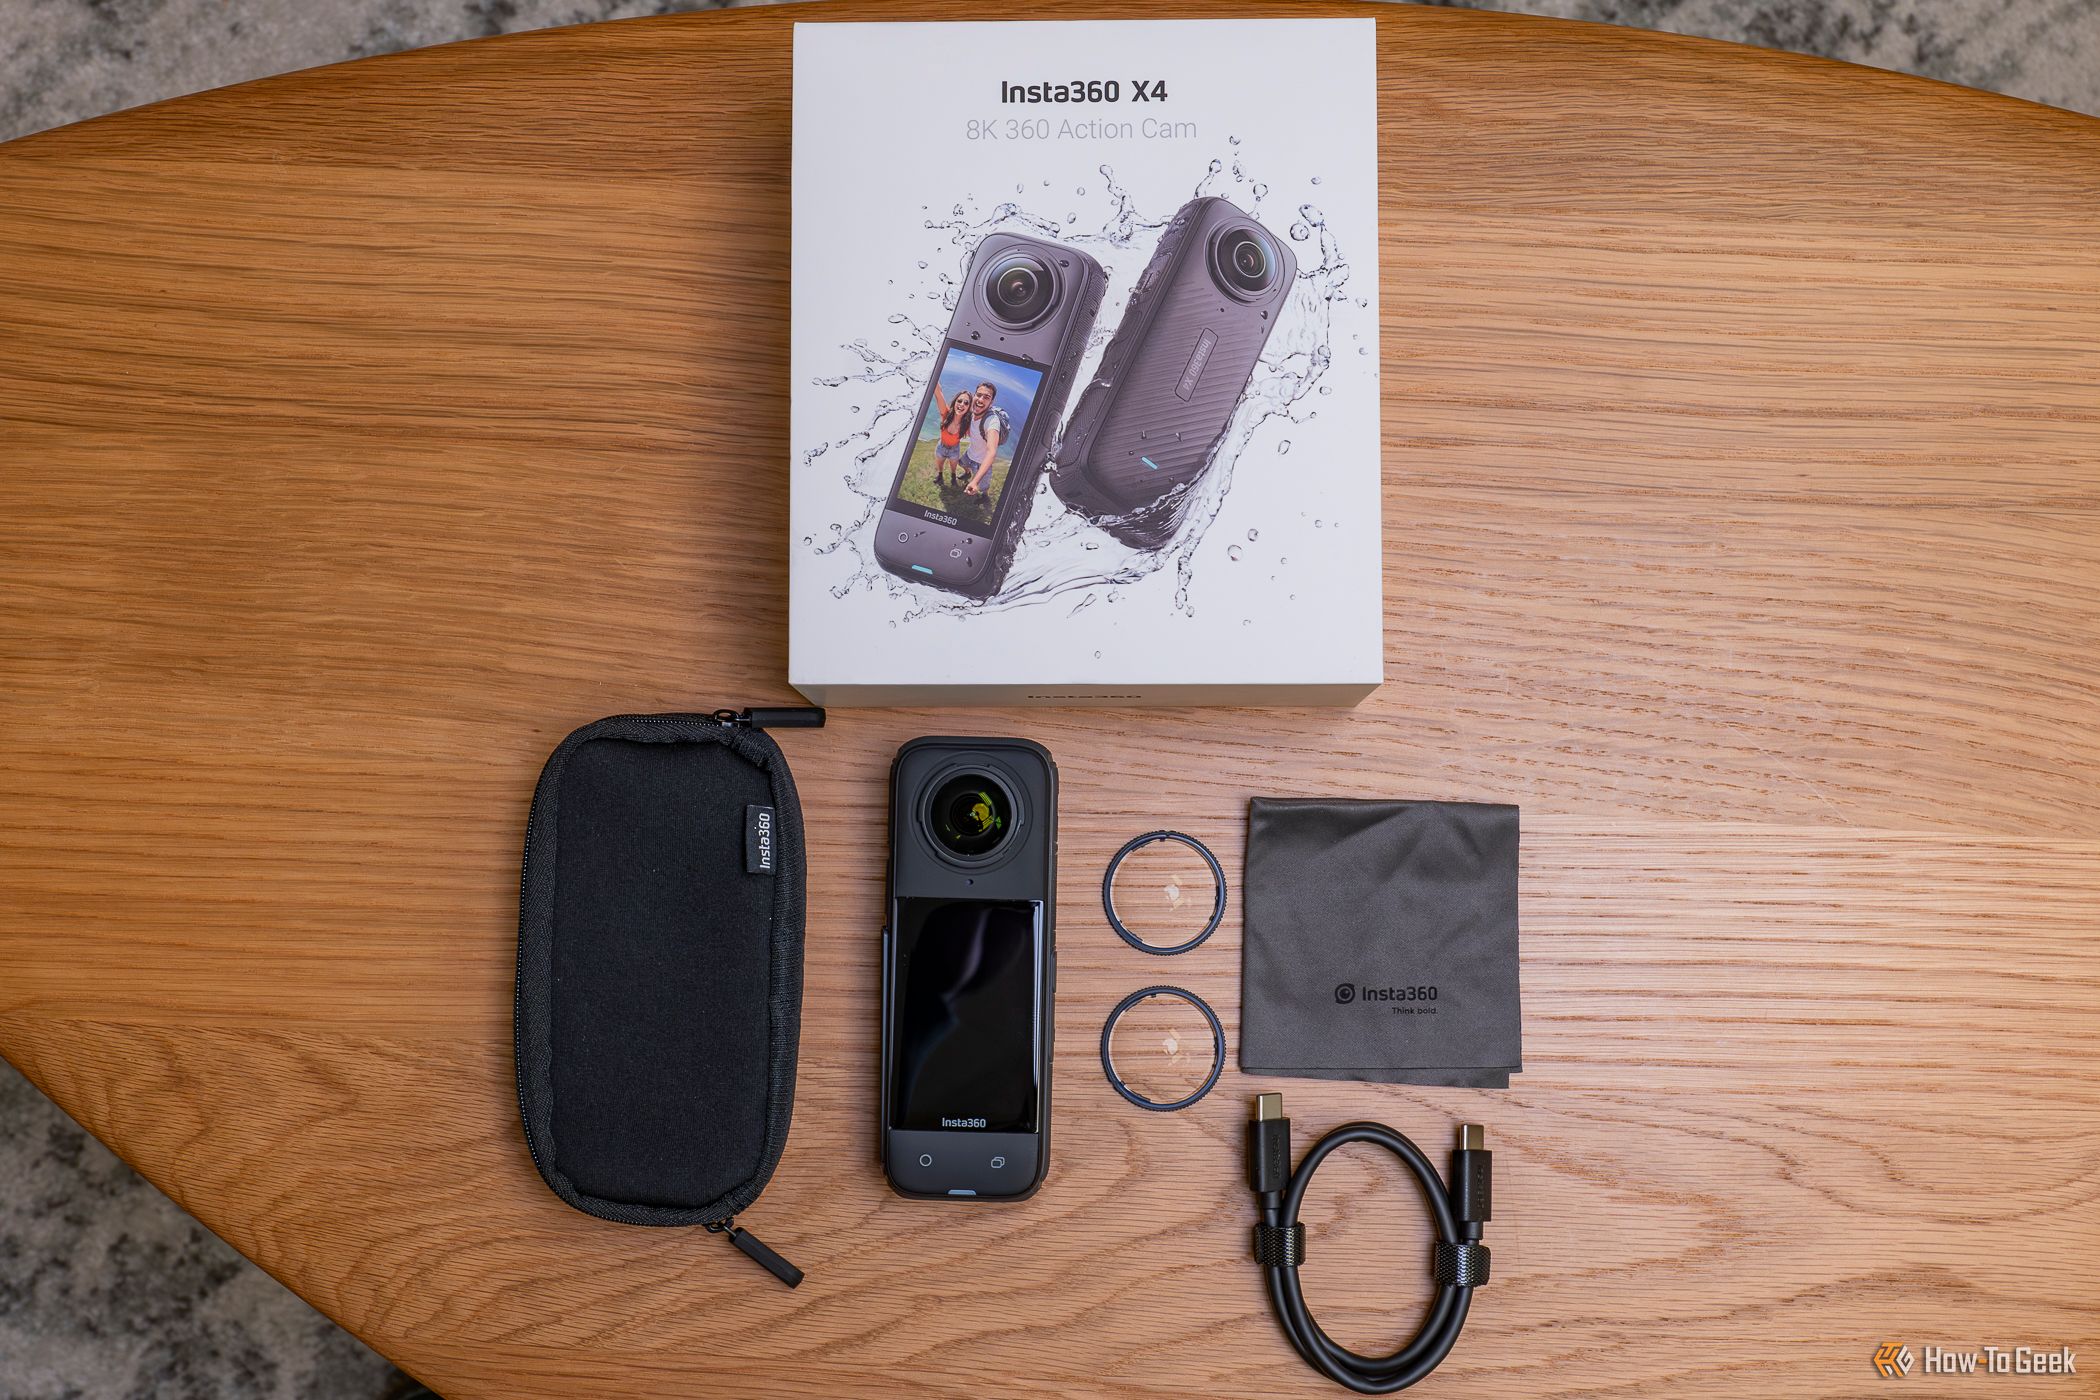 The Insta360 X4 next to box and included accessories